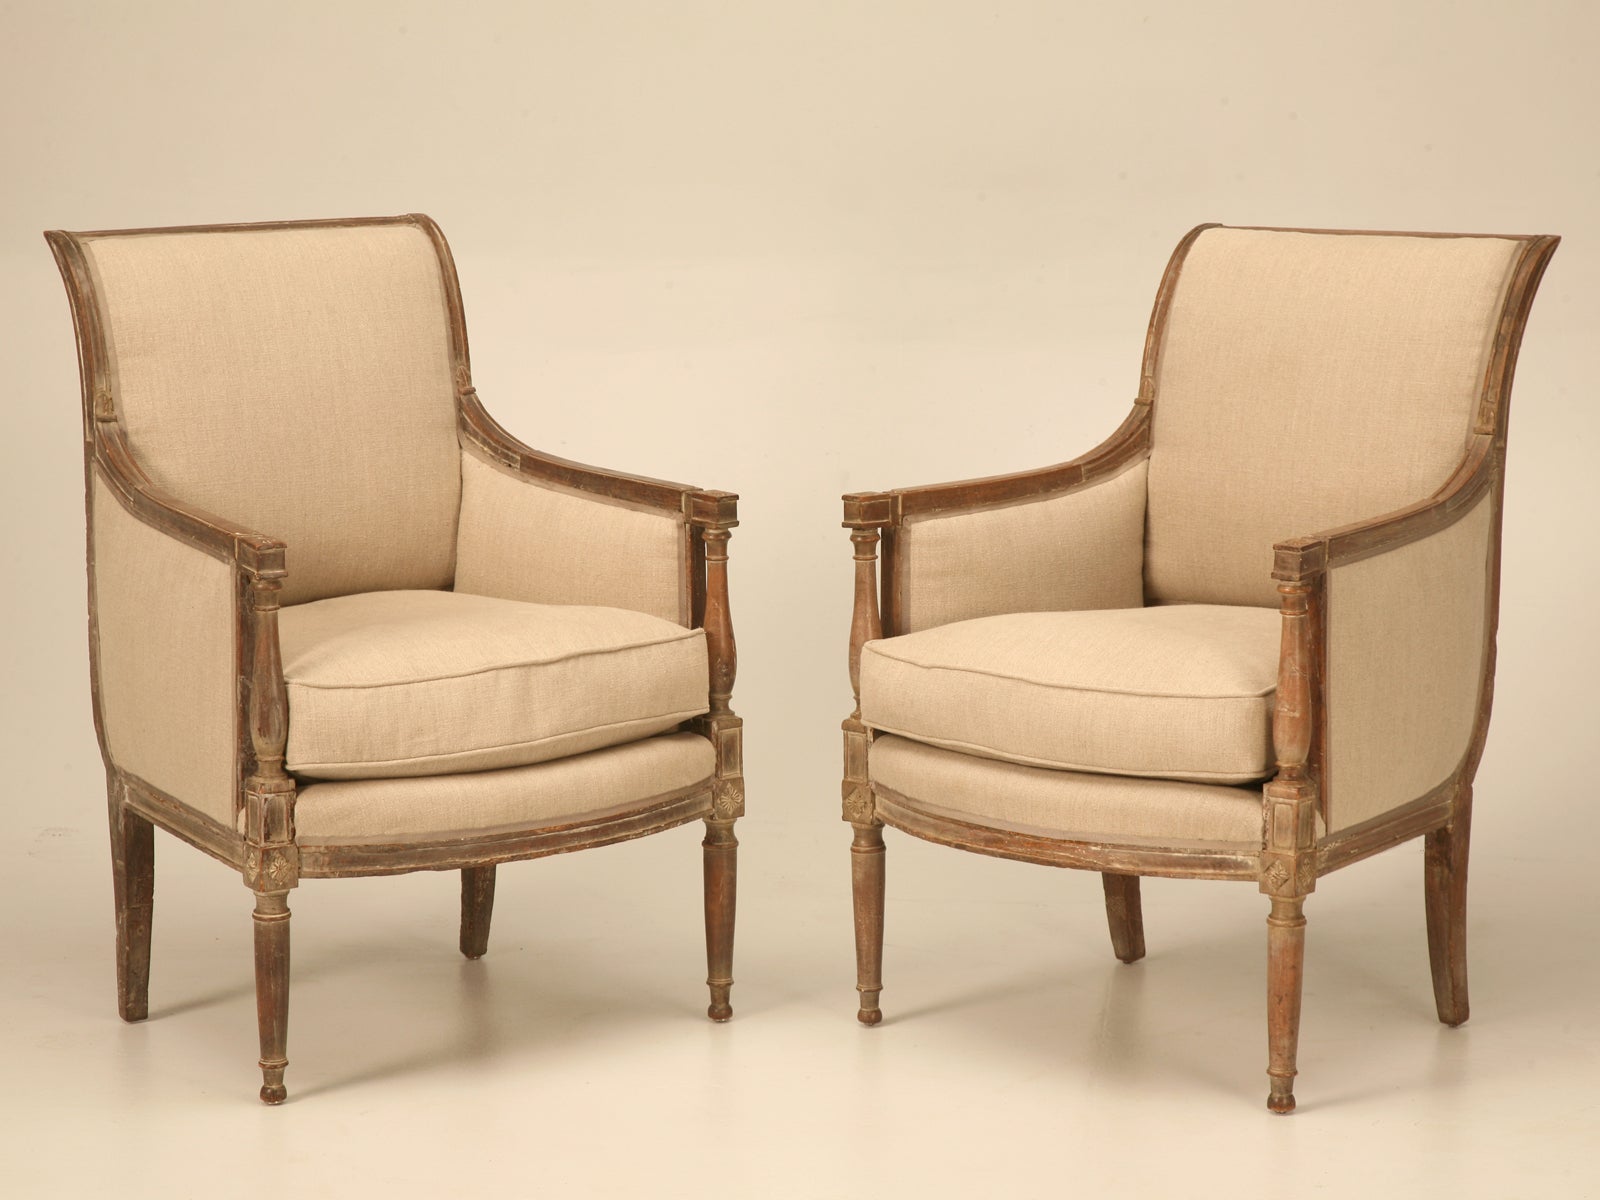 Pair of Early 19th Century French Directoire Arm Chairs/Bergeres